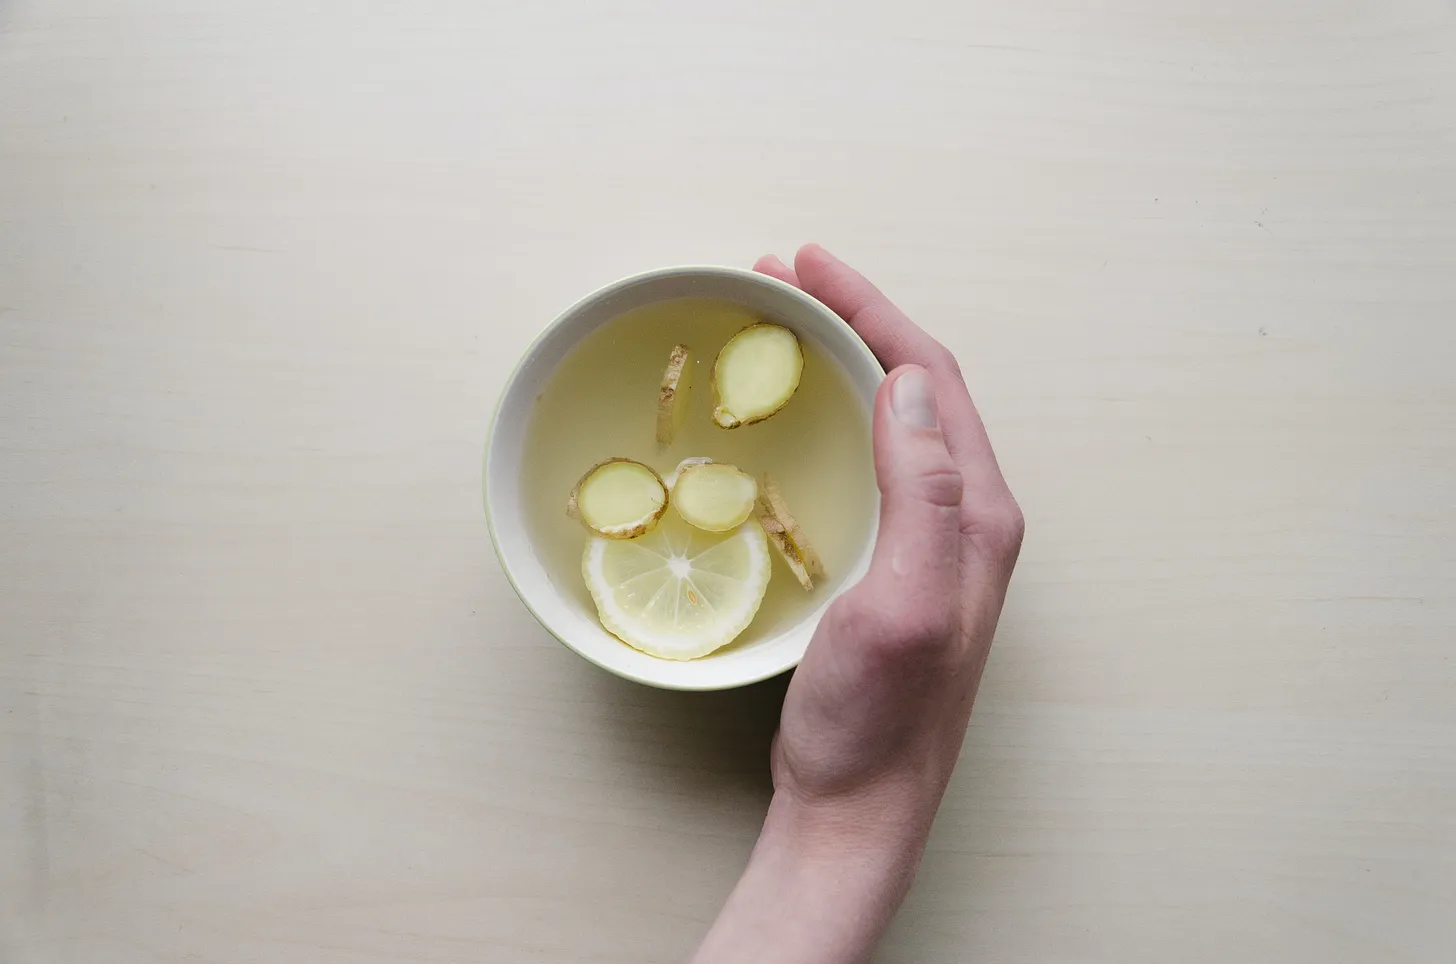 A cup of tea with ginger and lemon in it